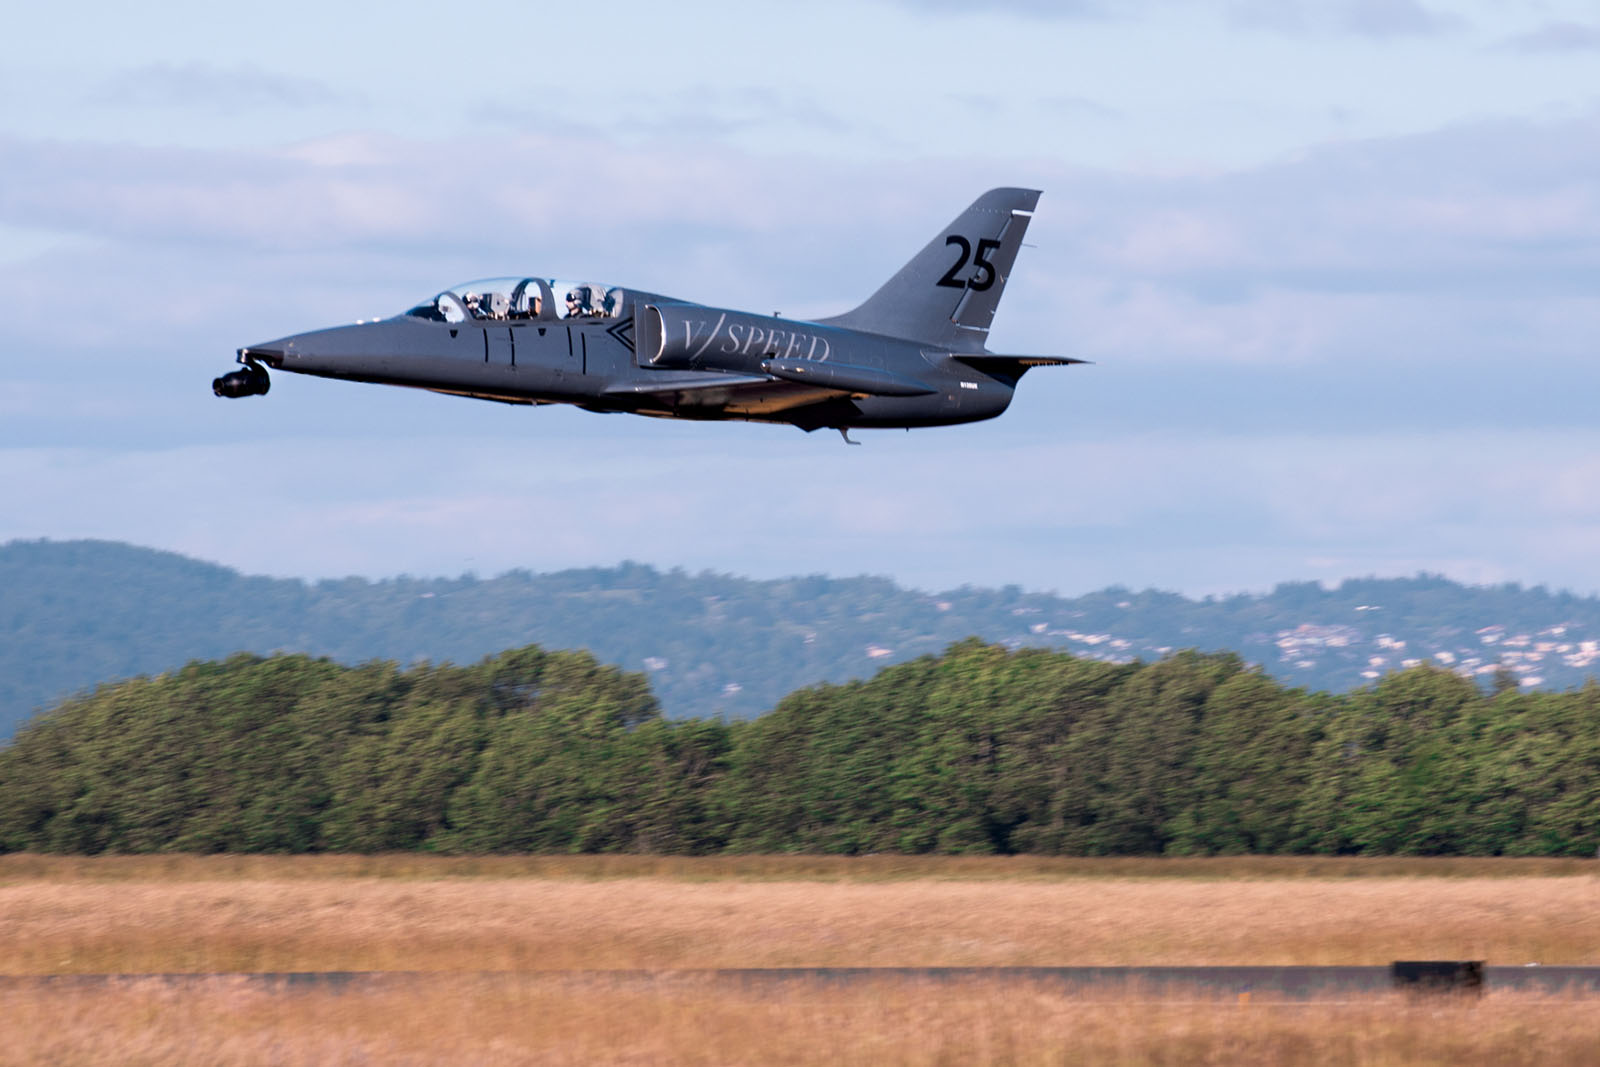 V/SPEED’s Aero L-39 Albatros—shown here just after takeoff—is a high-performance jet trainer fitted with one of the most advanced camera rigs in the business.